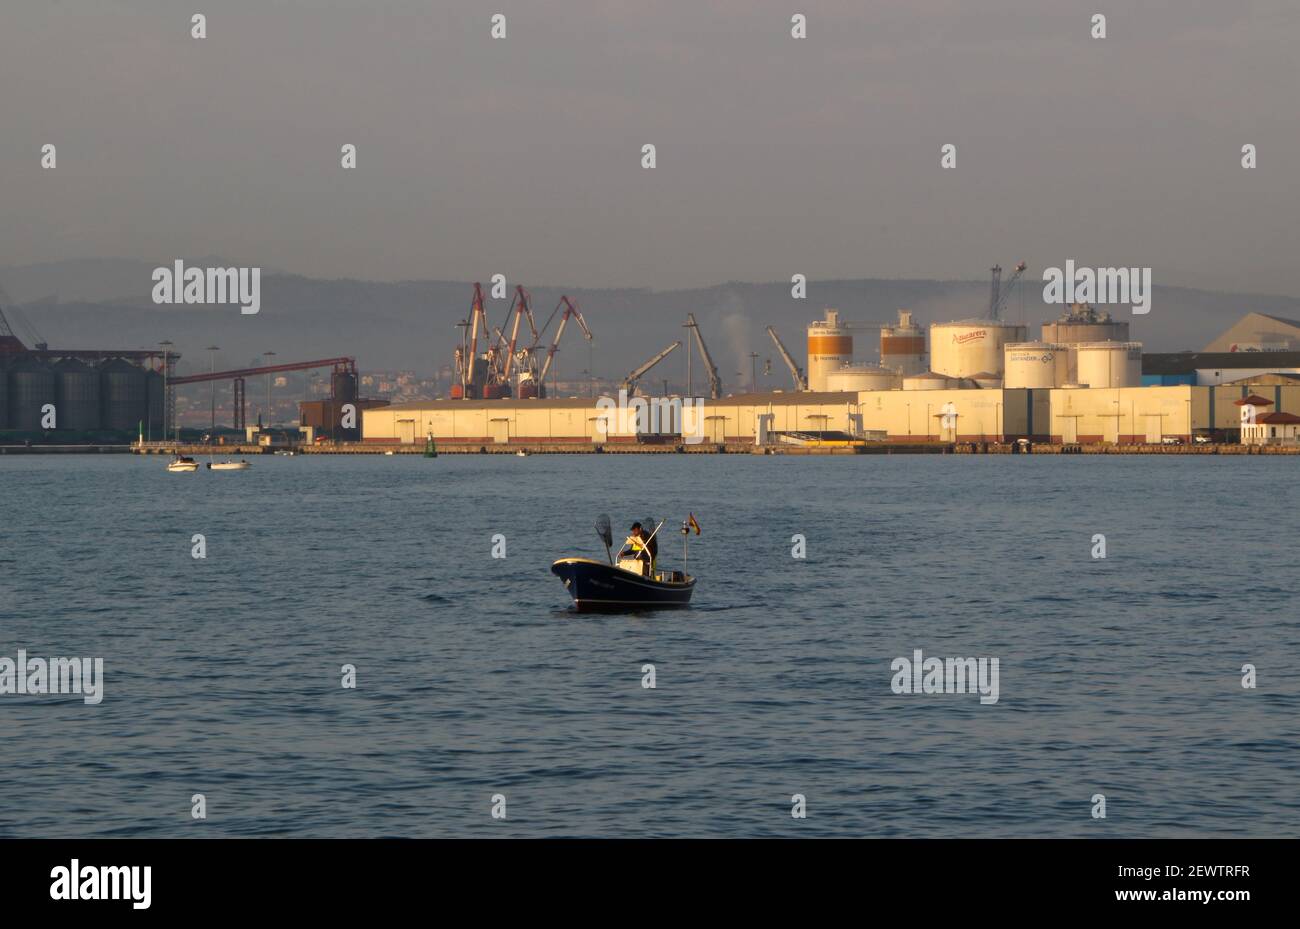 https://c8.alamy.com/comp/2EWTRFR/small-boat-with-lone-person-heading-out-to-fish-in-santander-bay-cantabria-spain-early-morning-with-dock-cranes-silos-and-wharves-behind-2EWTRFR.jpg